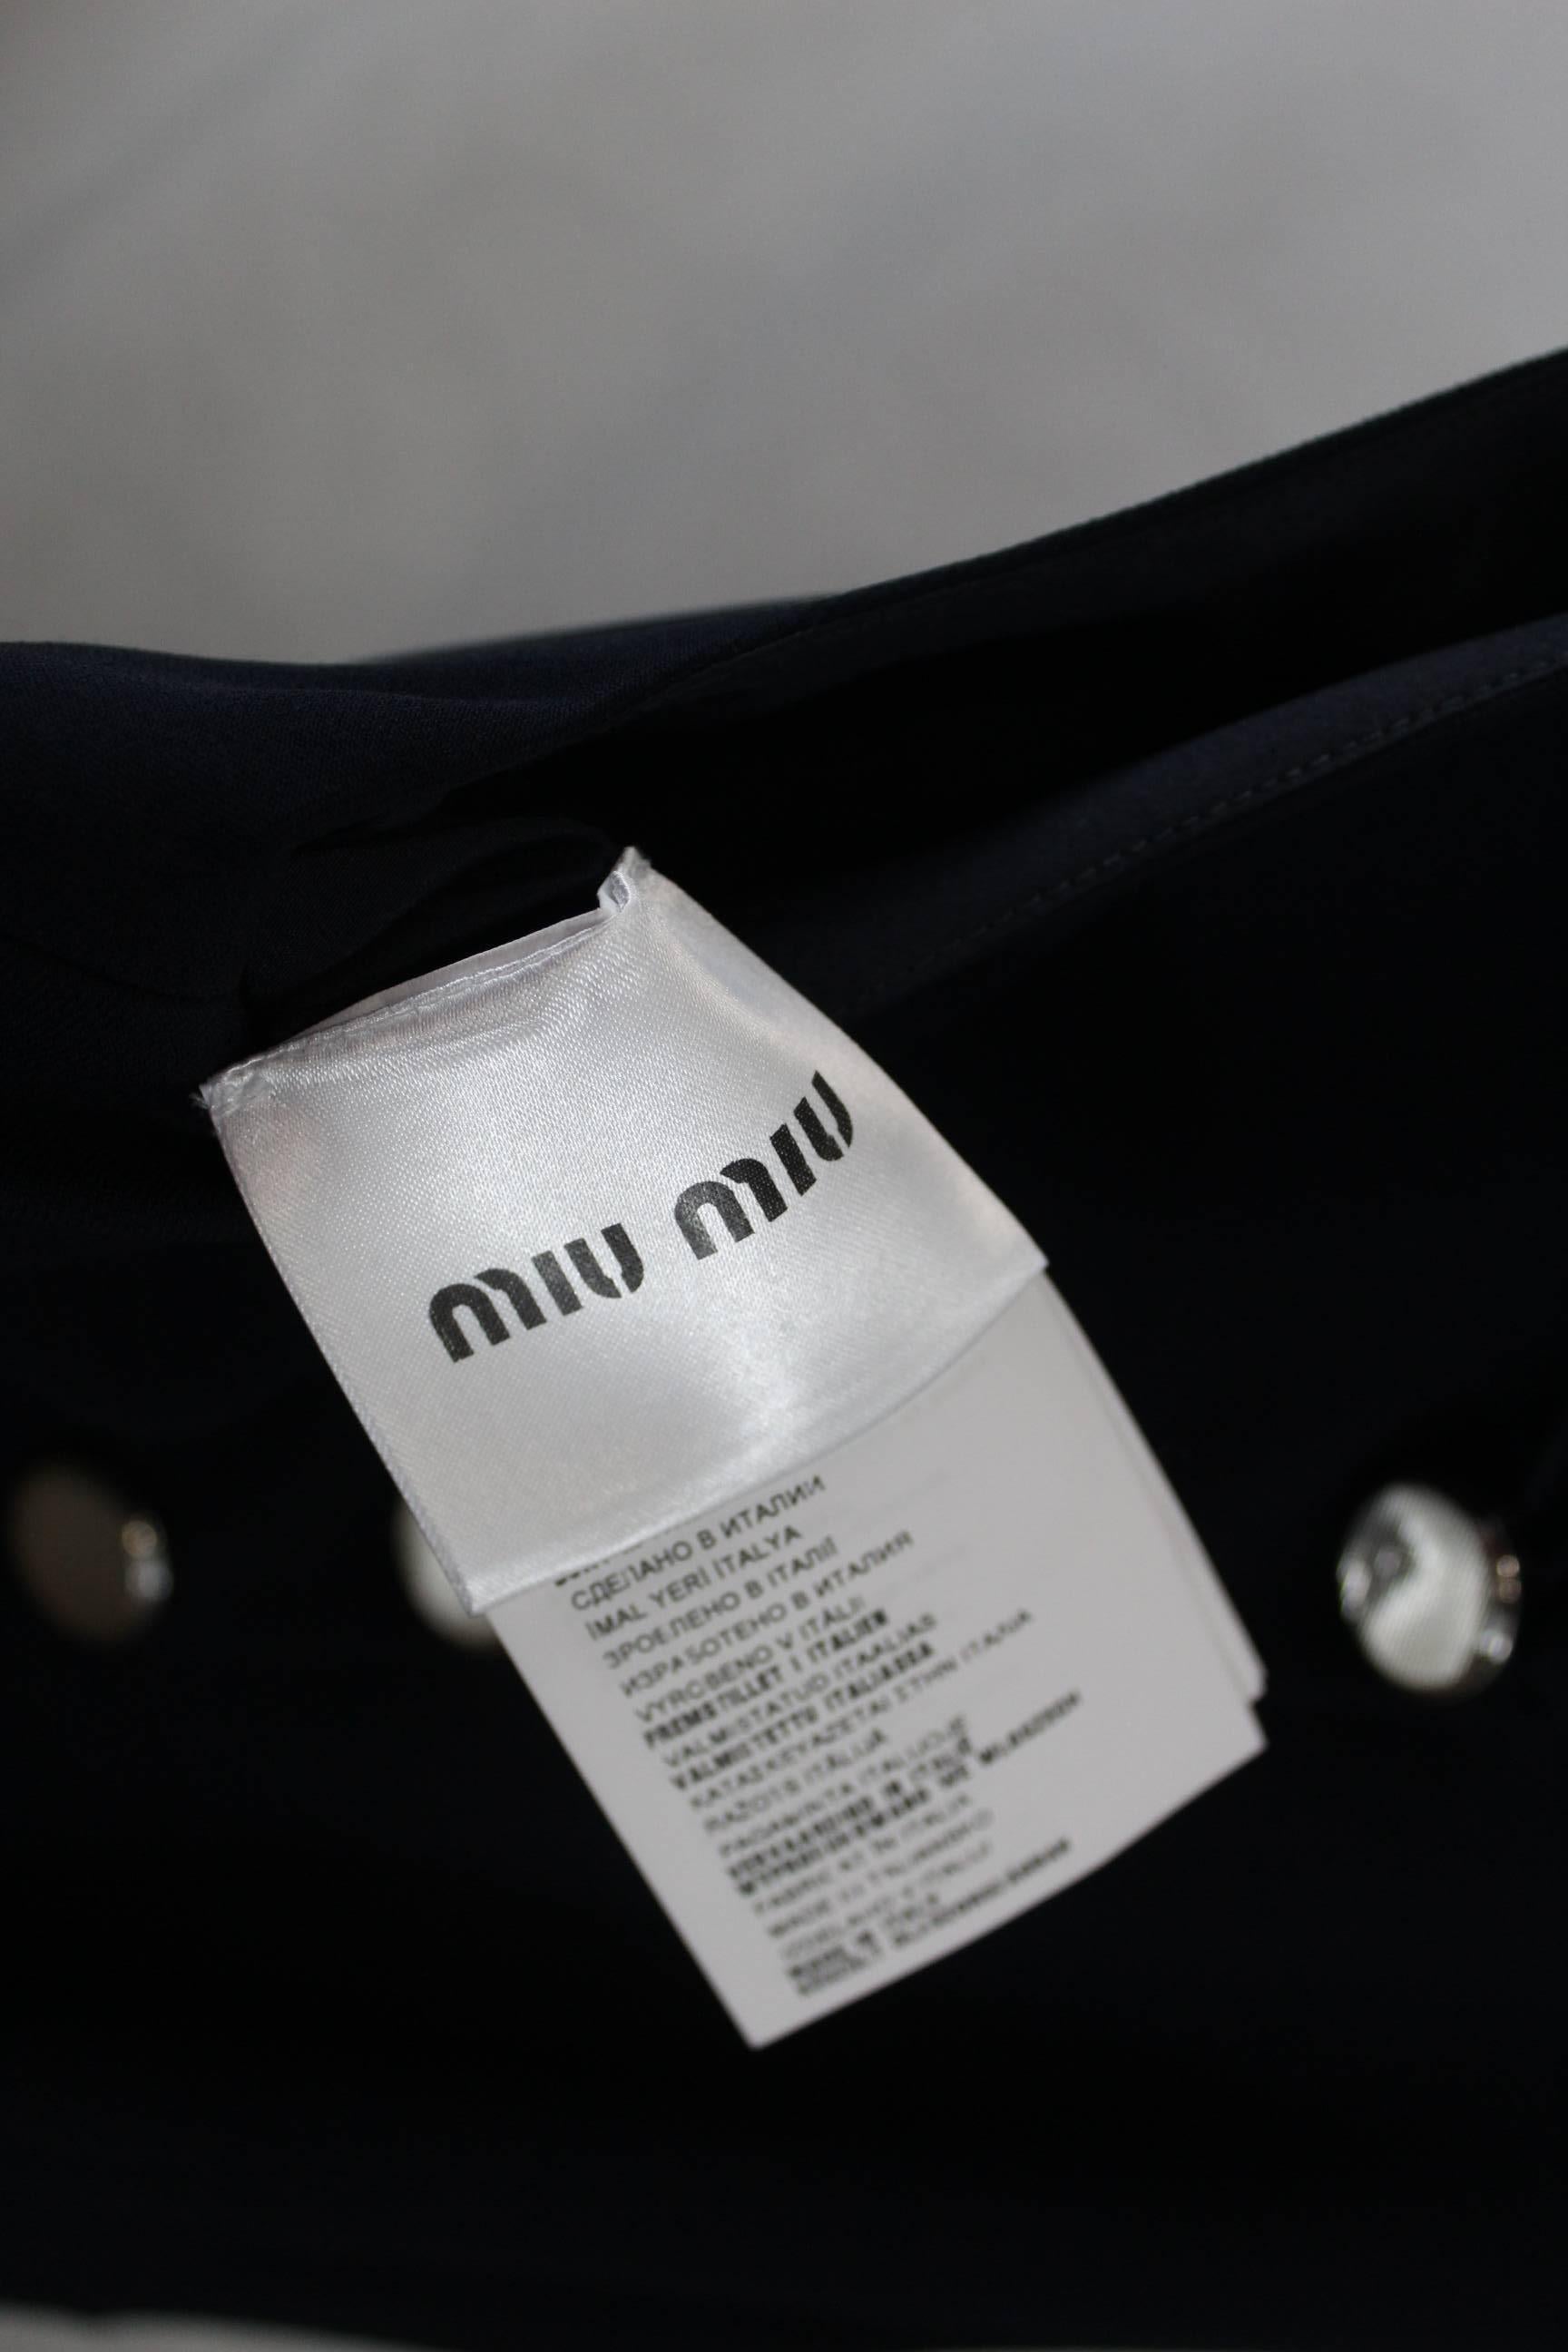 Black Miu Miu Navy Day Dress in excellent condition. Retail Price 1300$. S 36 For Sale